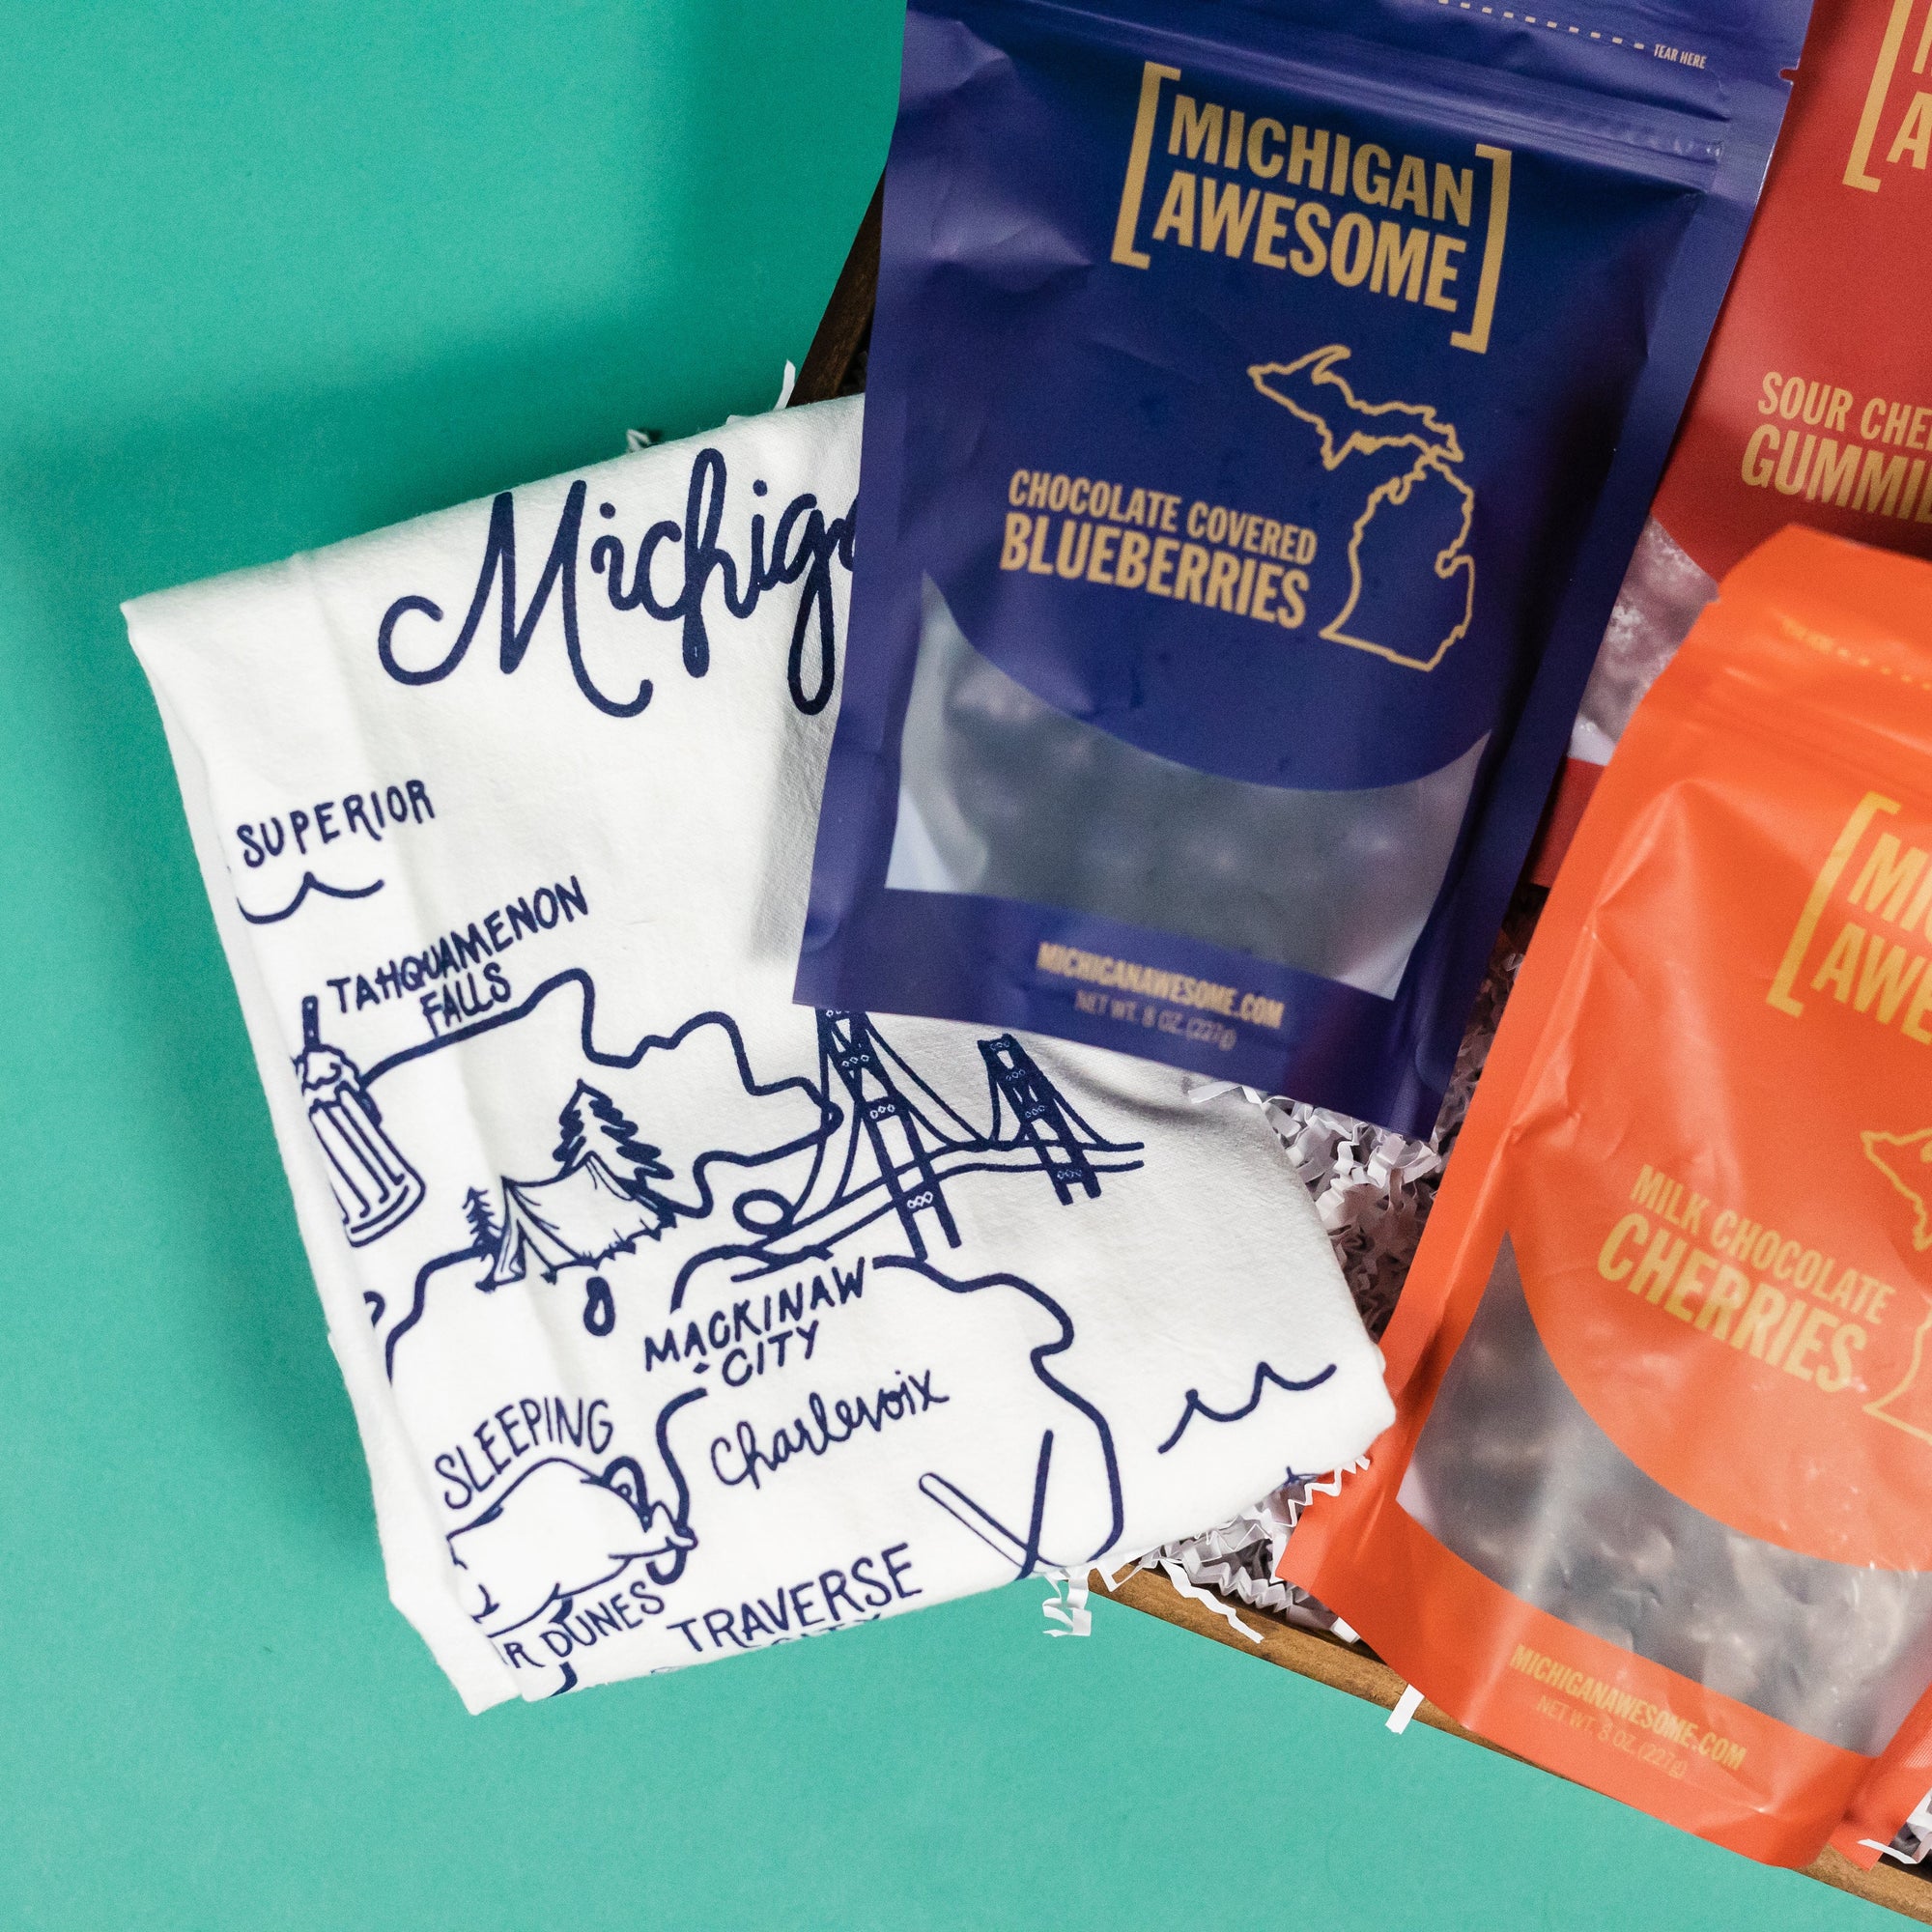 On a calming blue and teal background sits a wooden tray with a close-up of an assortment of Michigan Awesome snacks and an illustrated map of Michigan tea towel.